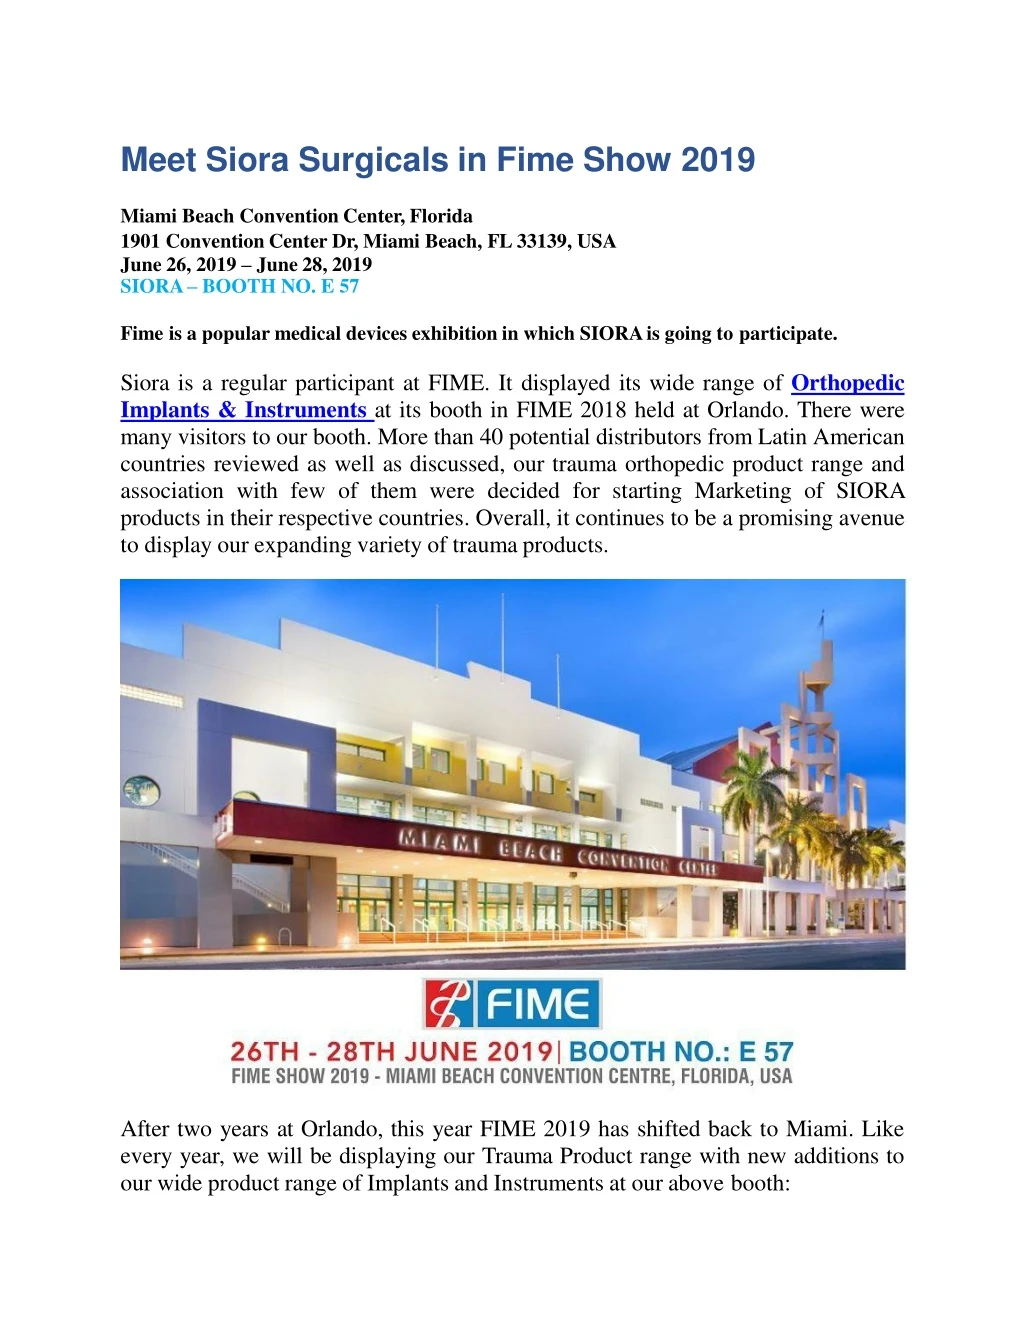 meet siora surgicals in fime show 2019 miami